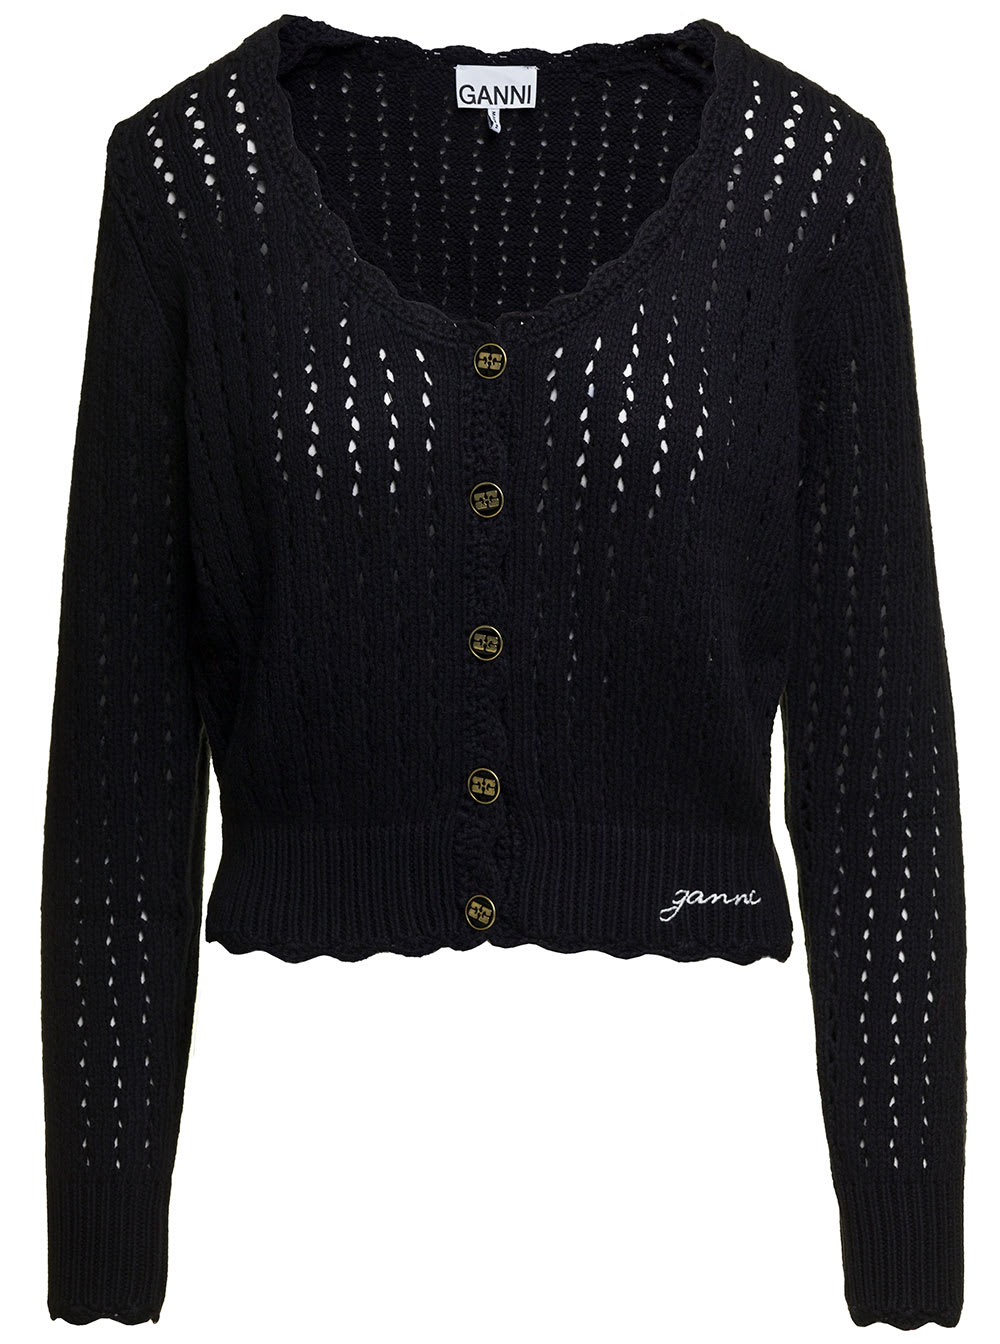 GANNI BLACK CARDUGAN WITH CONTRASTING LOGO EMBROIDERY IN COTTON LACE WOMAN